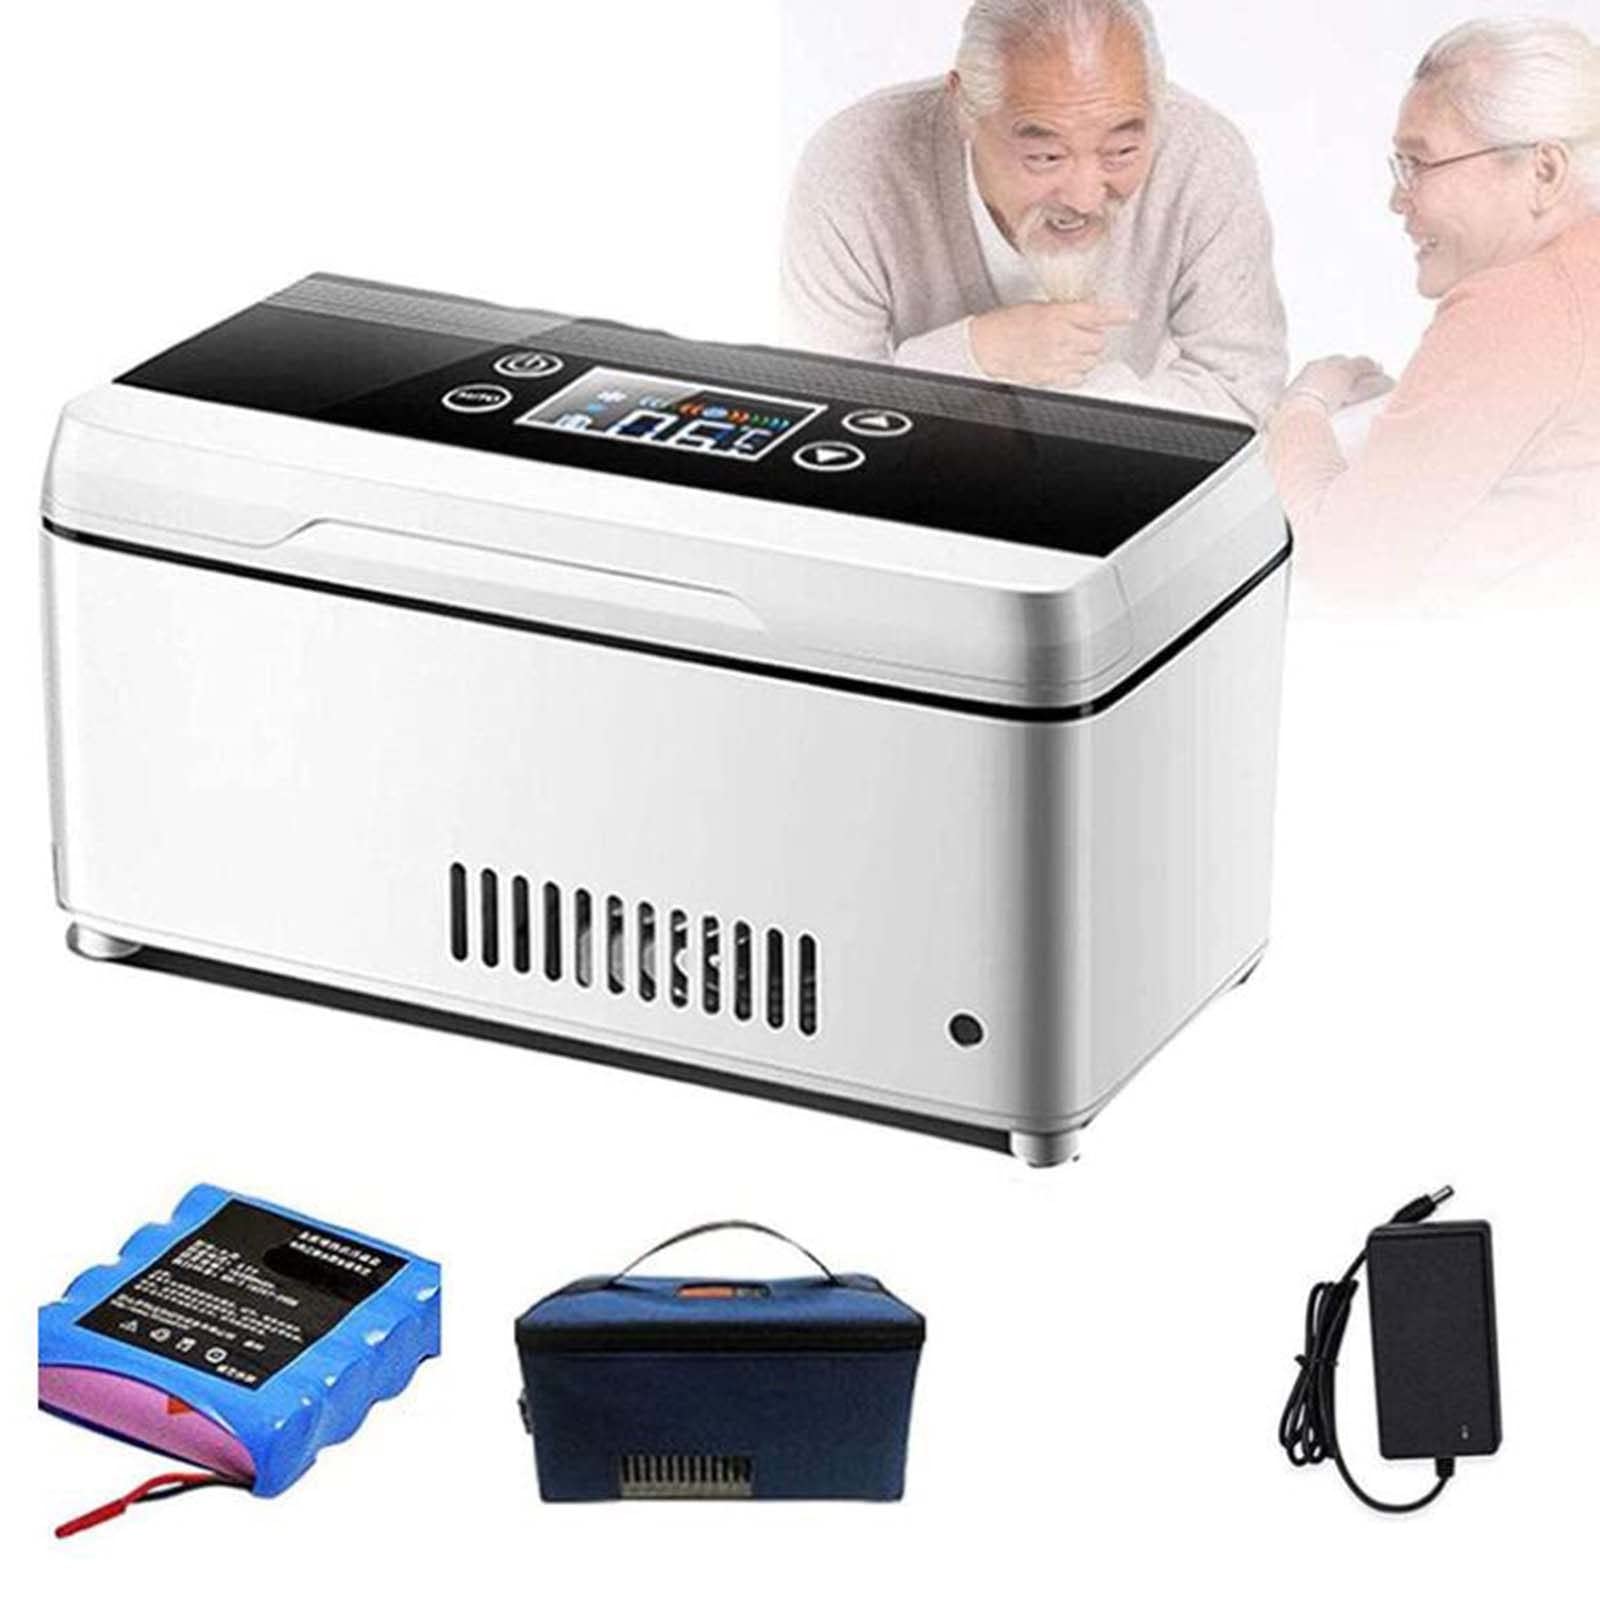 Medication Refrigerator Insulin Cooler Box Electric Cooler Portable Travel  Box Thermostat 2-8 Degrees With Insulin Interferon Growth Hormone Vaccine  Eye Drops For Summer Travel Work 1battery